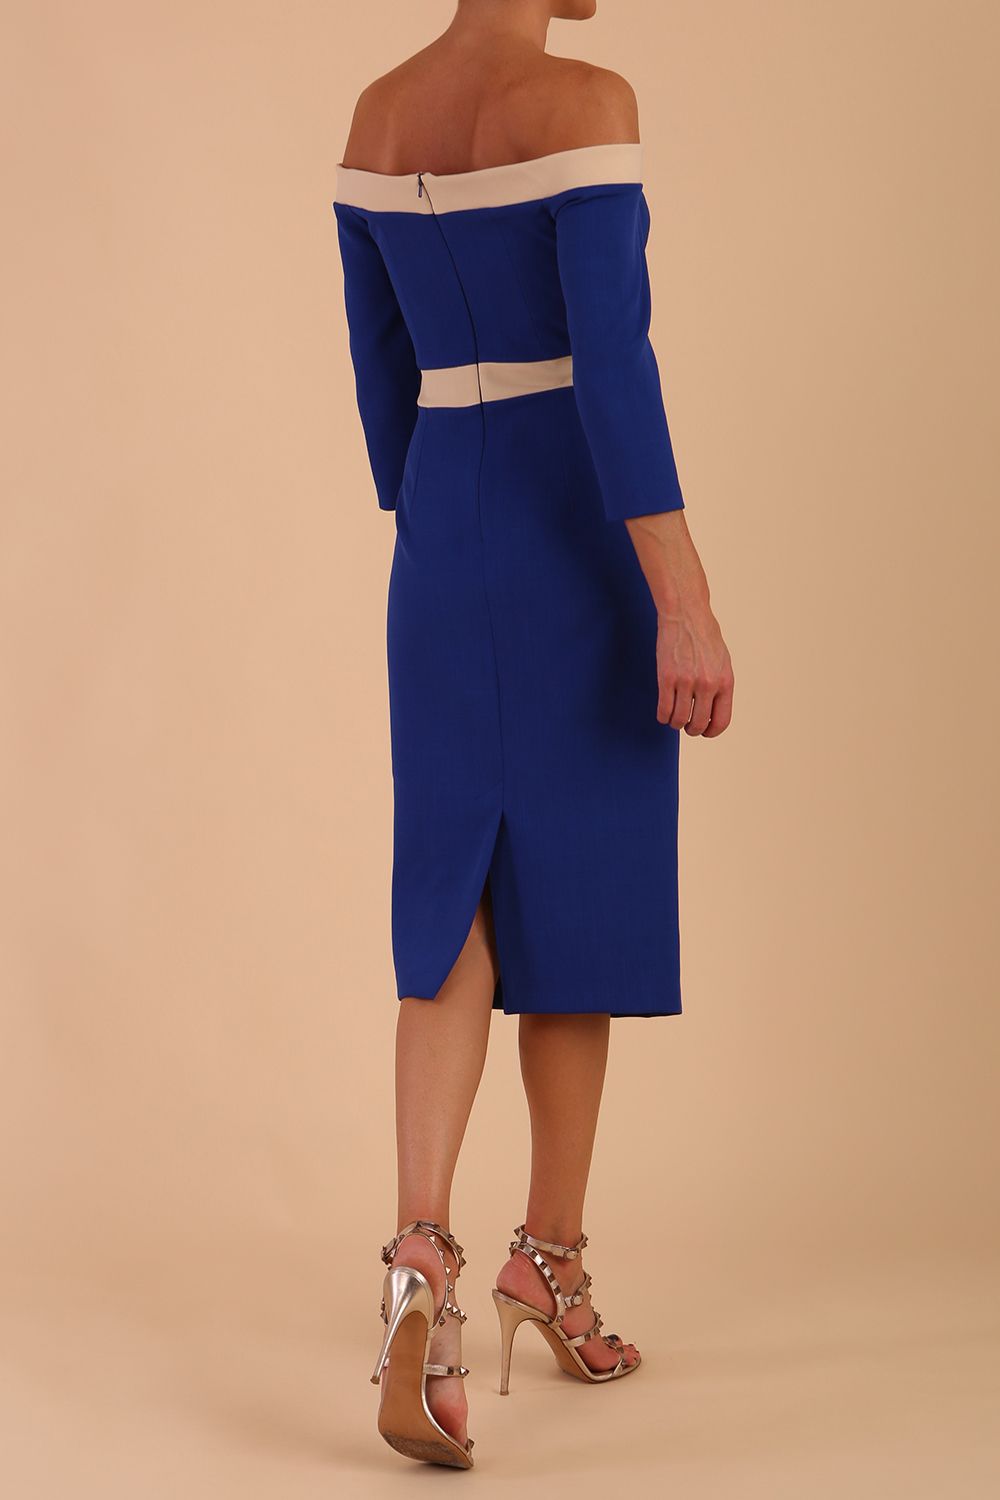 Model wearing a diva catwalk Brittany Off Shoulder Bow detail Pencil Dress with 3/4 sleeves and knee length in Cobalt Blue and Sandshell Beige colour back